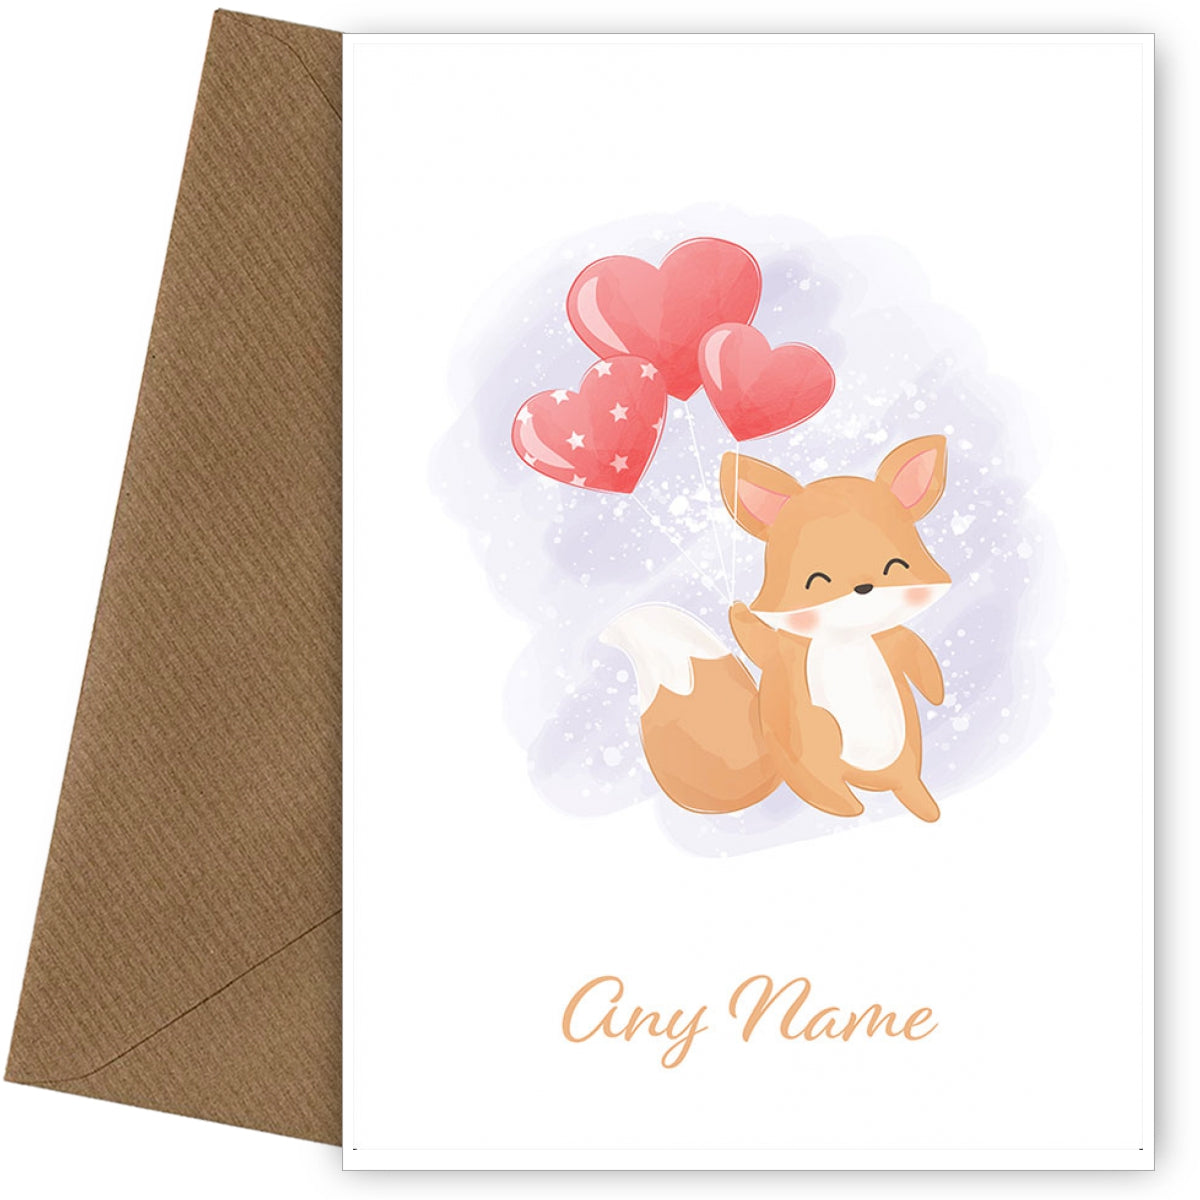 Personalised Cute Fox With Heart Shaped Balloons Card